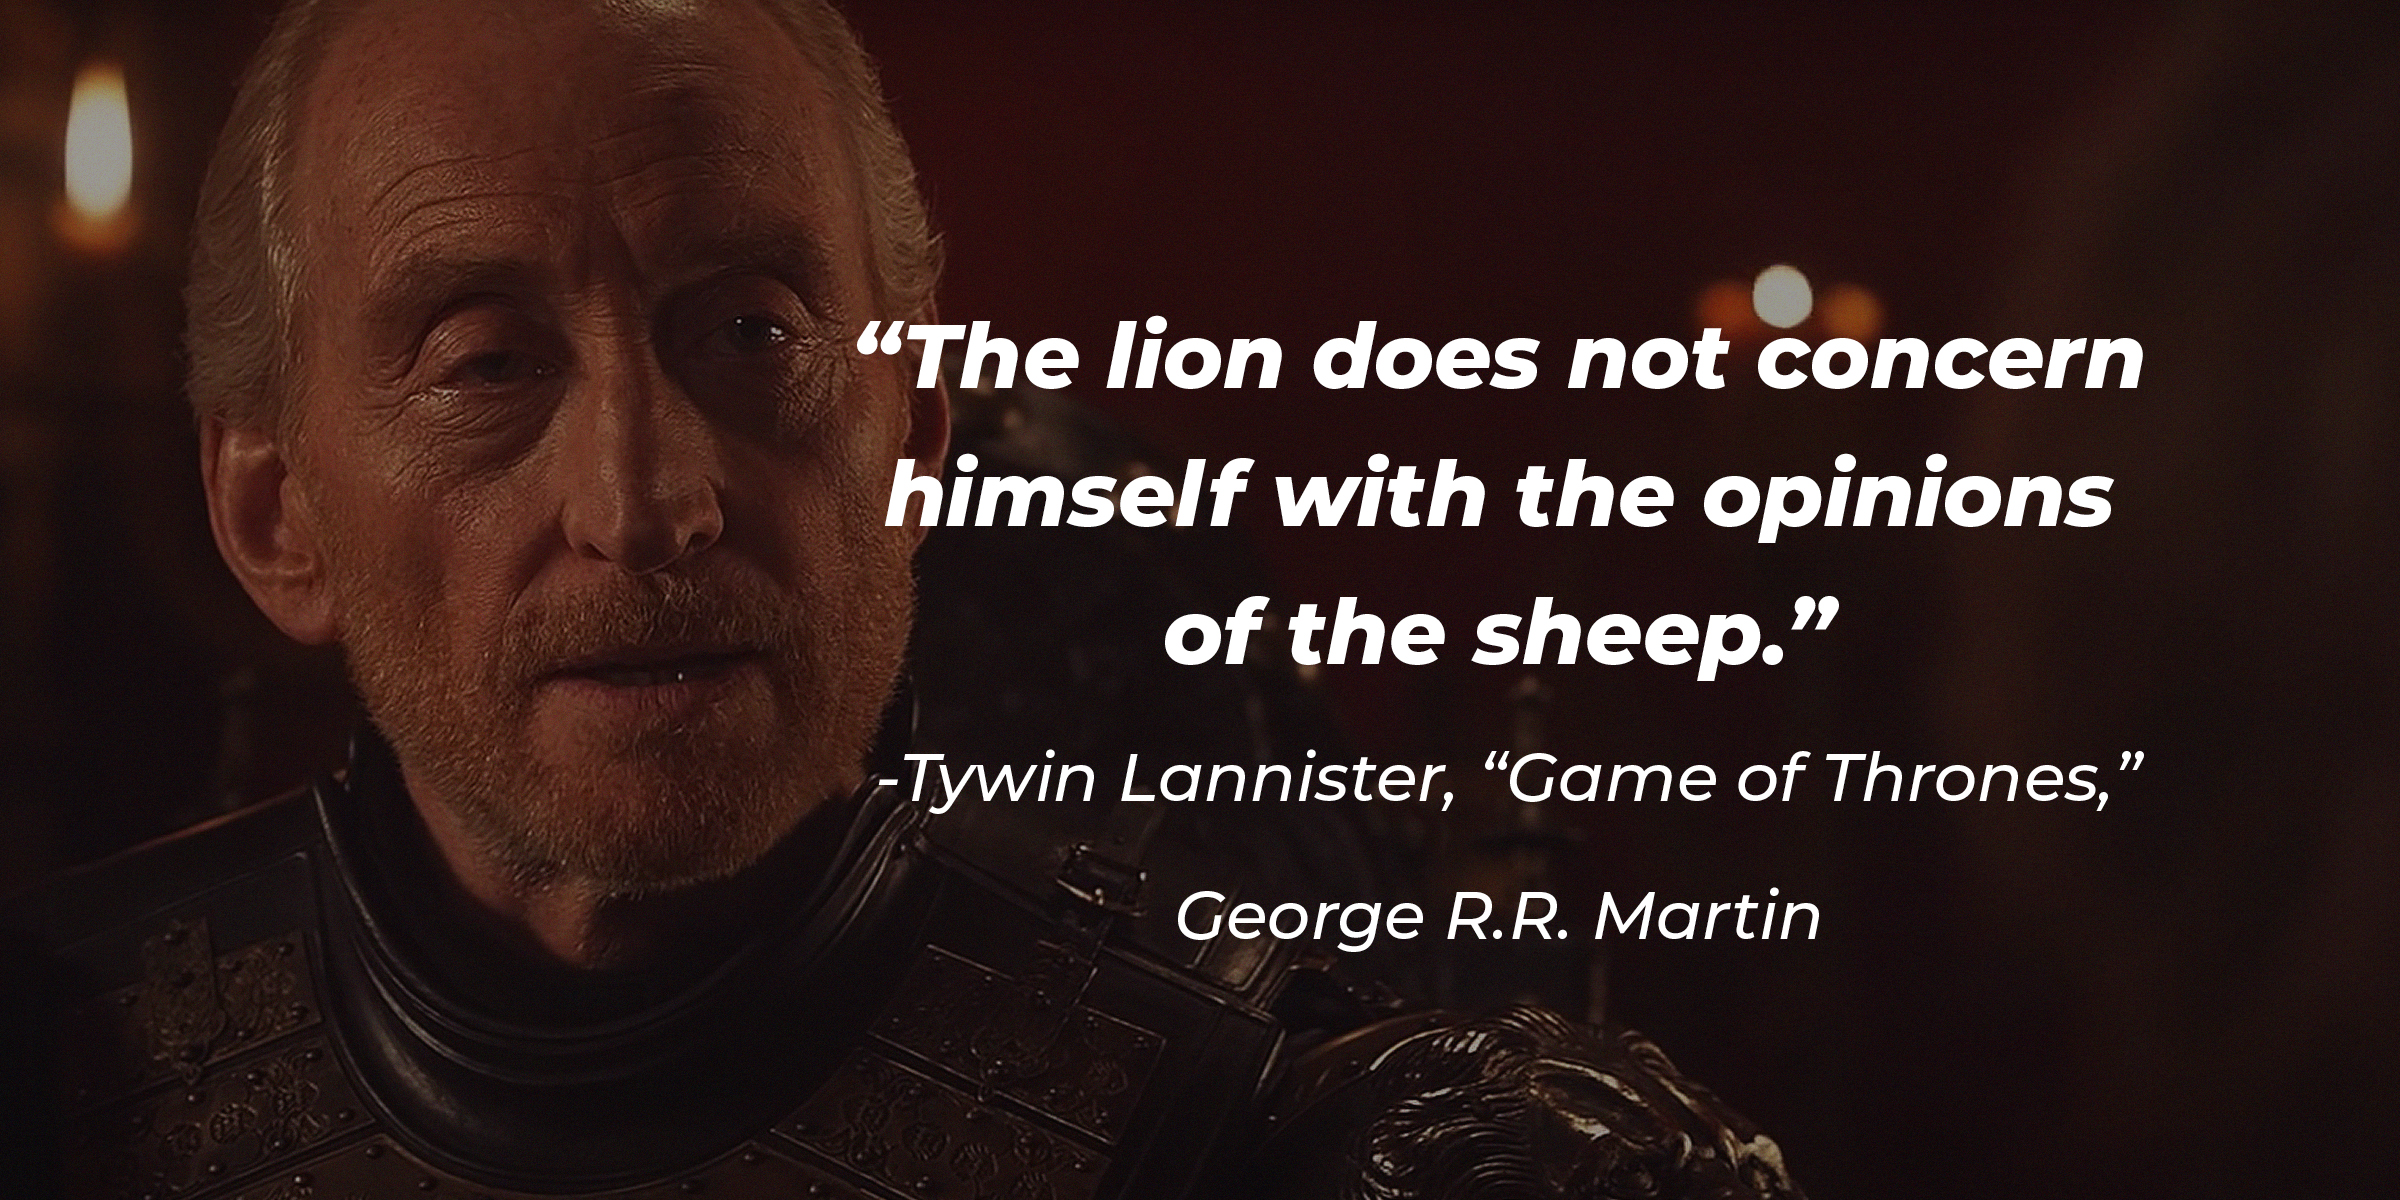 An image of Tywin Lannister with his quote: “The lion does not concern himself with the opinions of the sheep.” | Source: facebook.com/TheWalkingDeadAMC